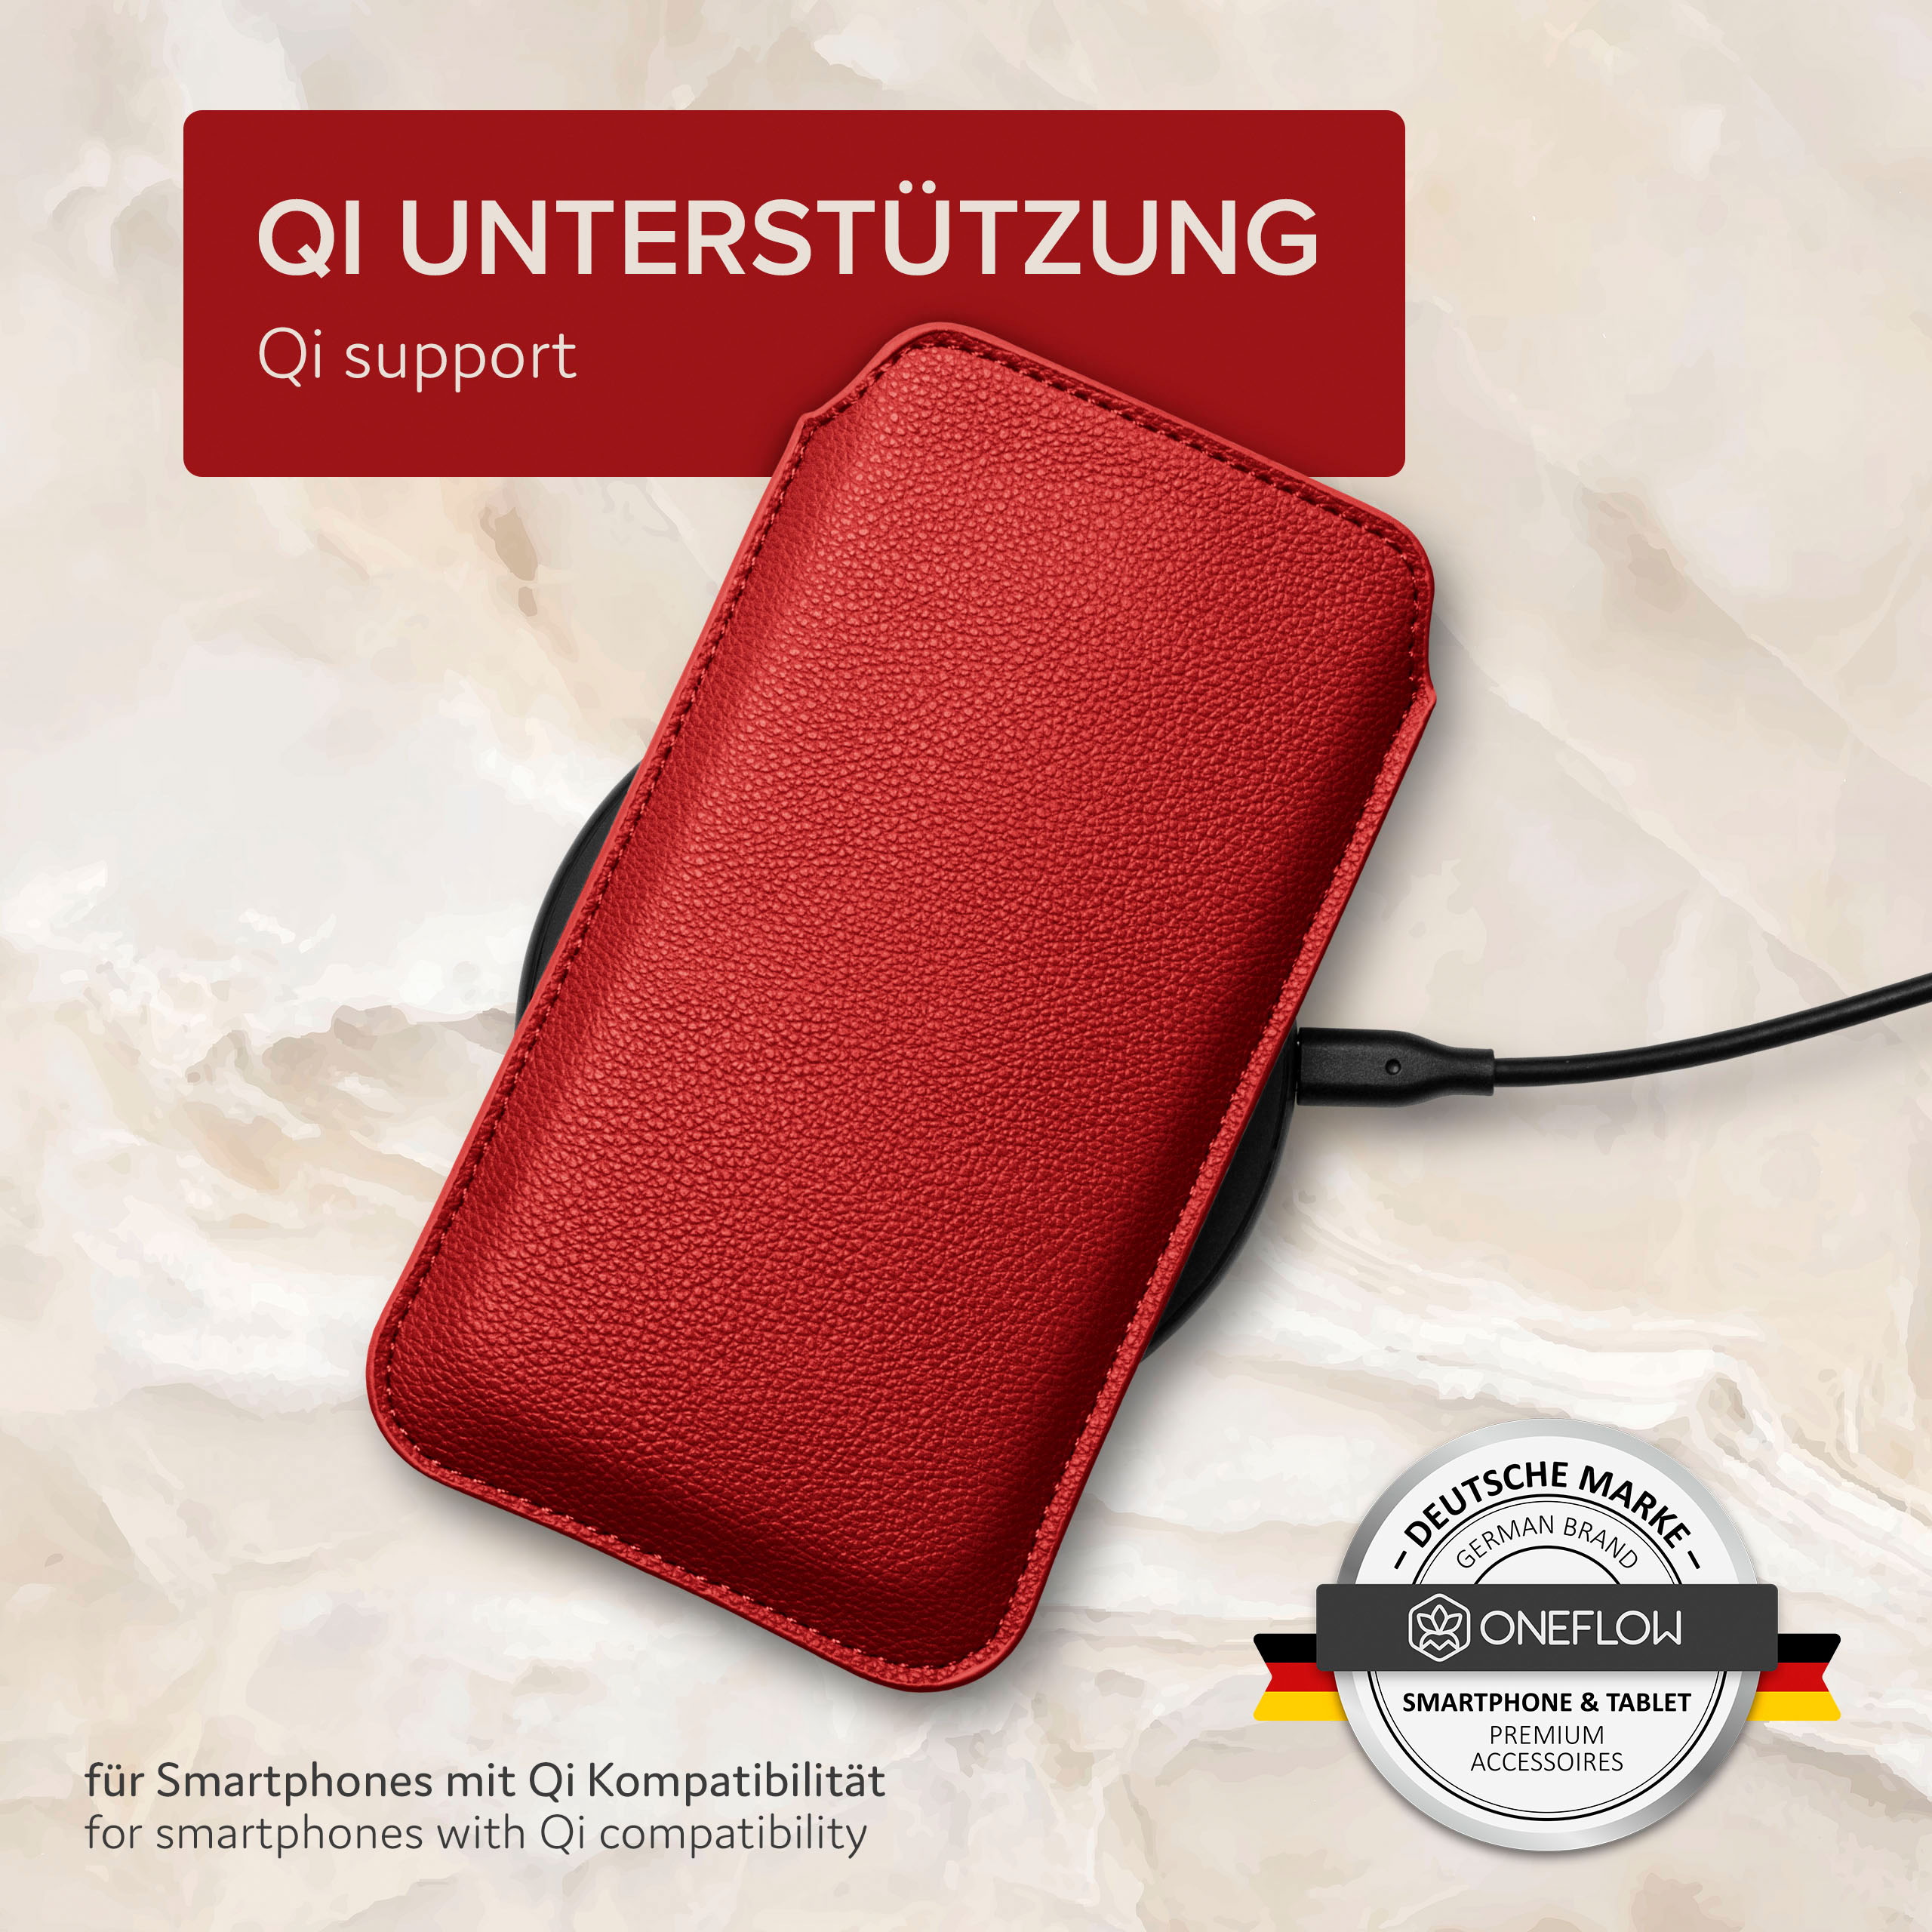 Compact, Xperia Full ONEFLOW Z1 Sony, Dunkelrot Einsteckhülle mit Cover, Zuglasche,